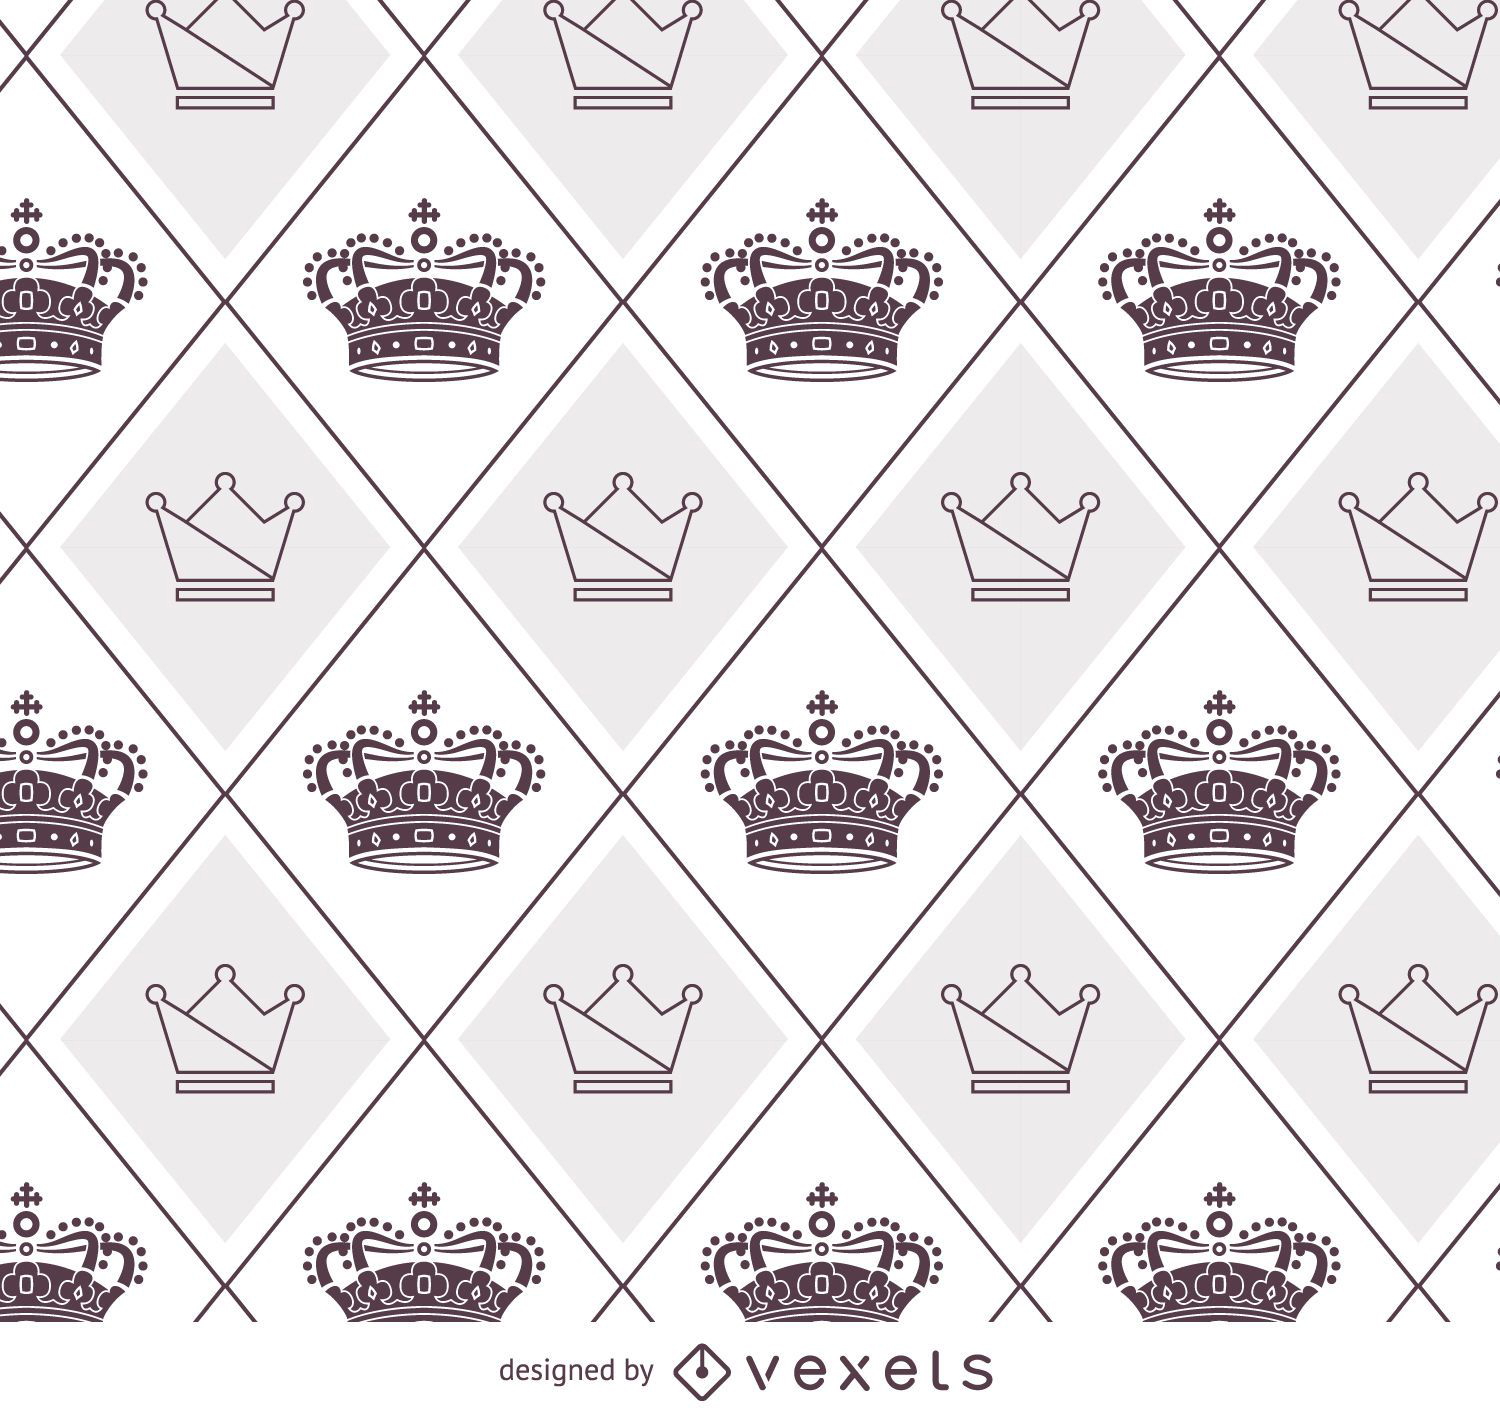 Illustrated crowns pattern